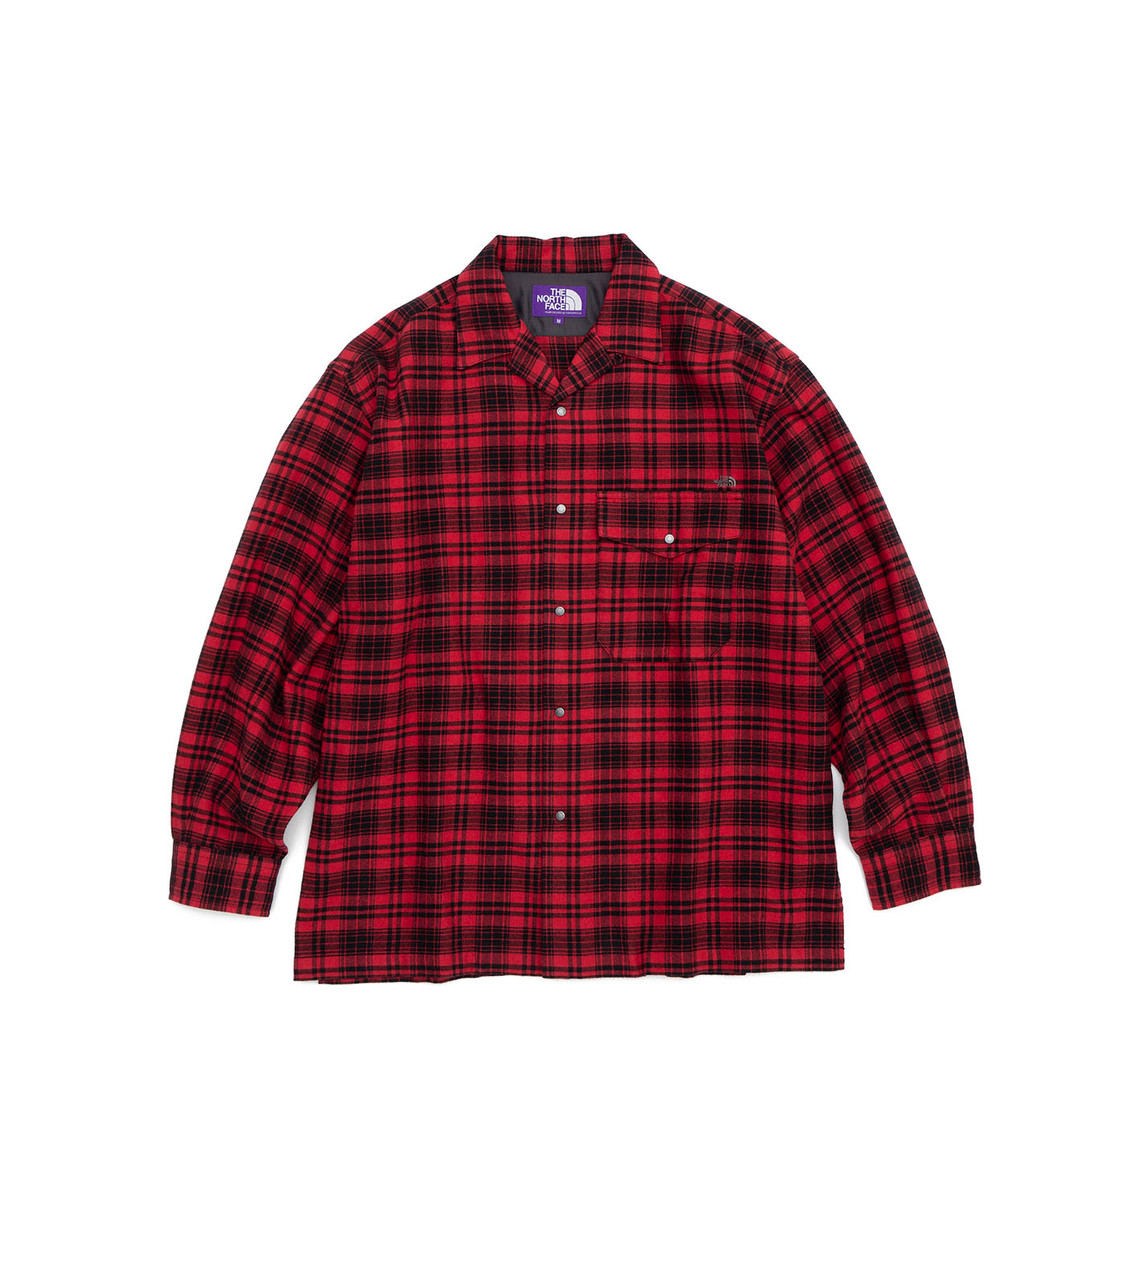 THE NORTH FACE PURPLE LABEL Flannel Plaid Field Shirt NT3266N 6314